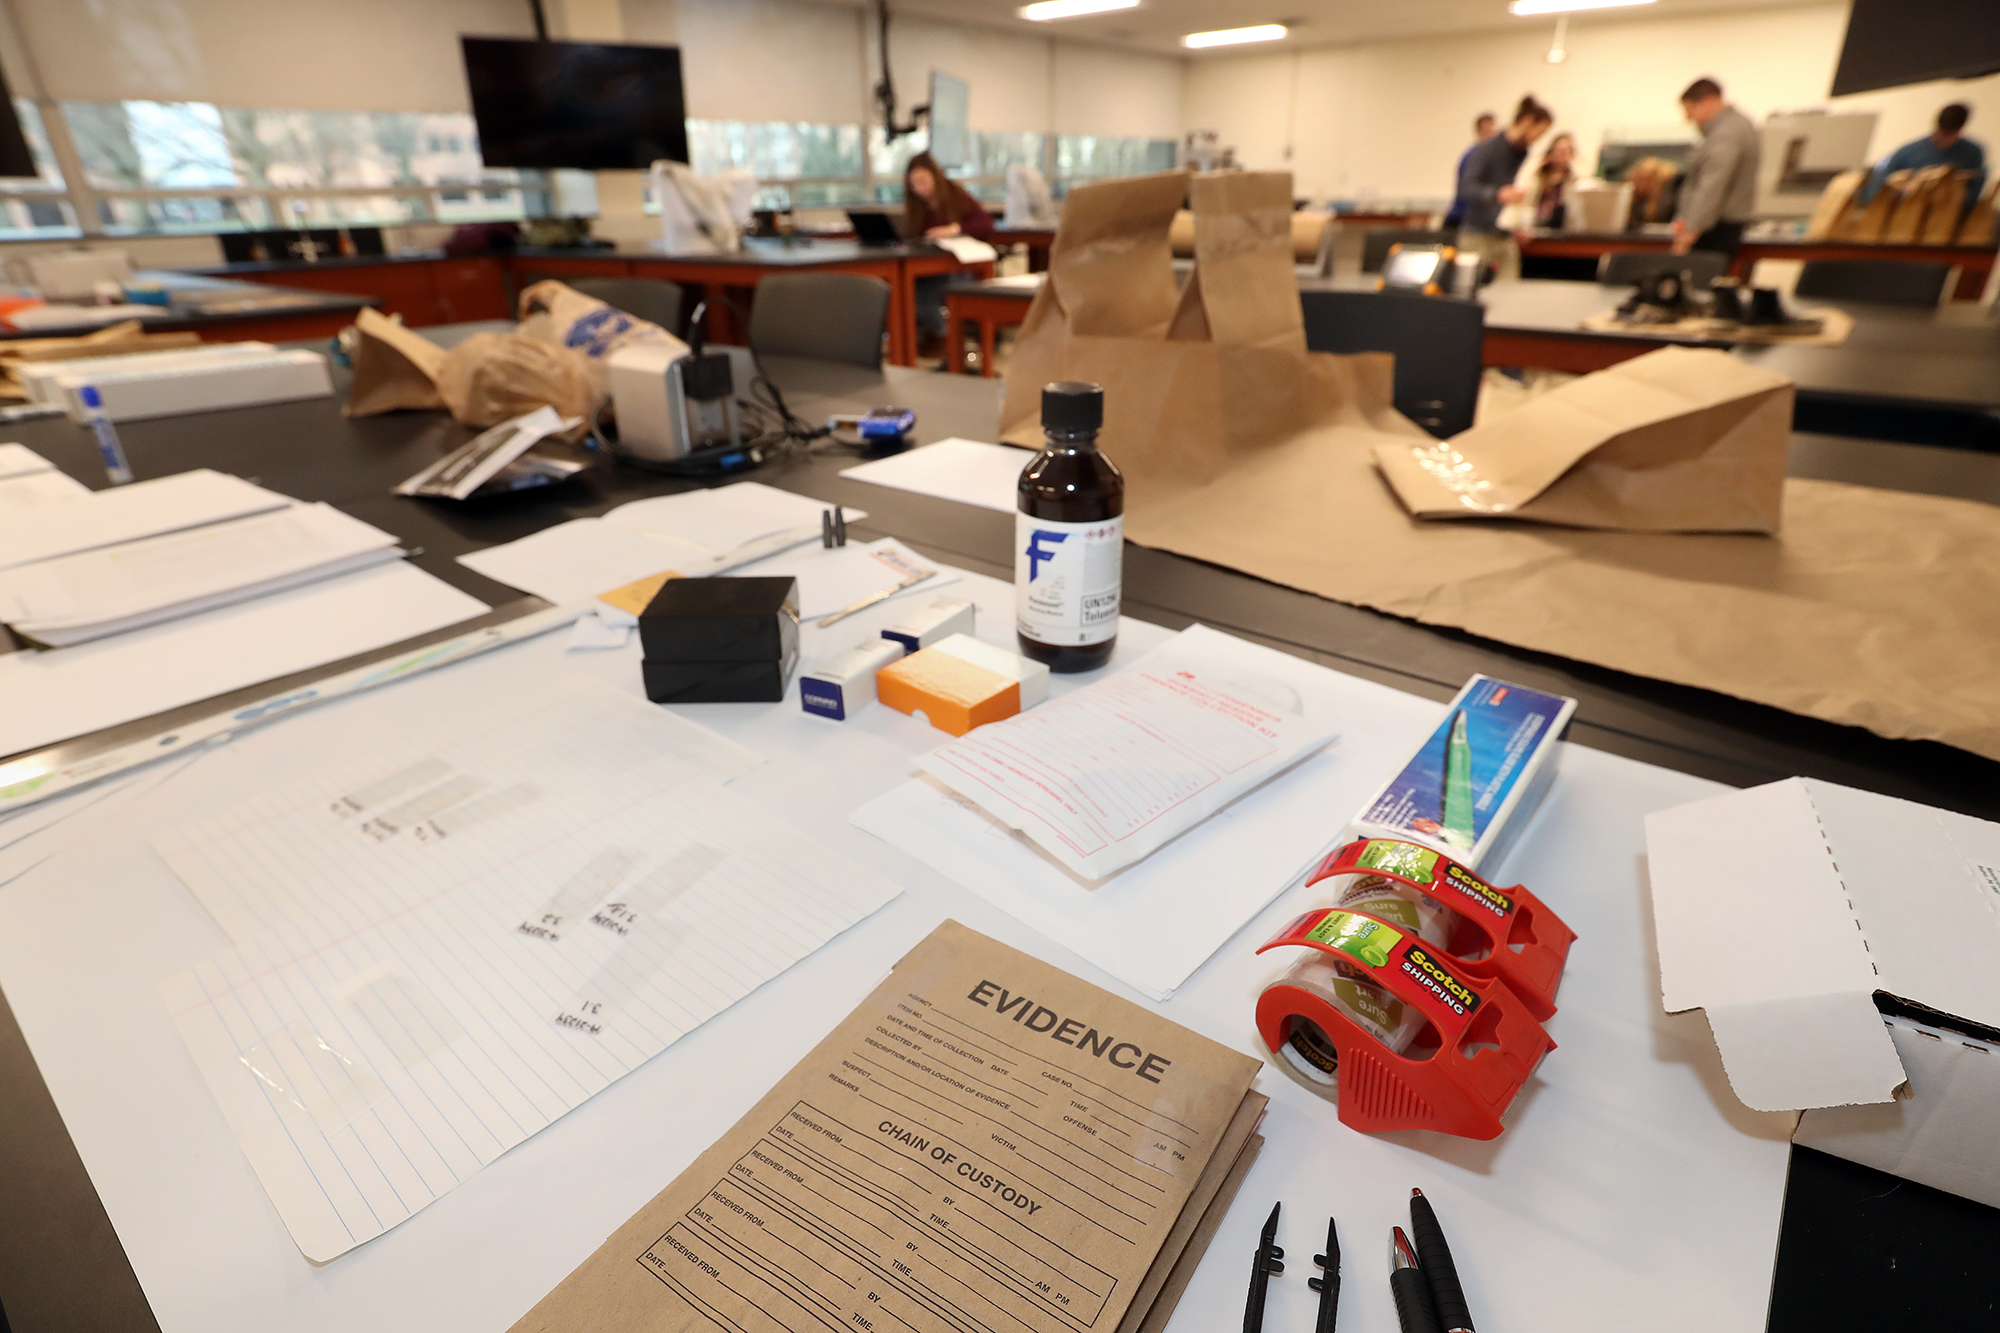 A table in the BGSU forensic lab features brown paper evidence bags, chemicals and others tools that the students in the background use to process crime scene evidence.